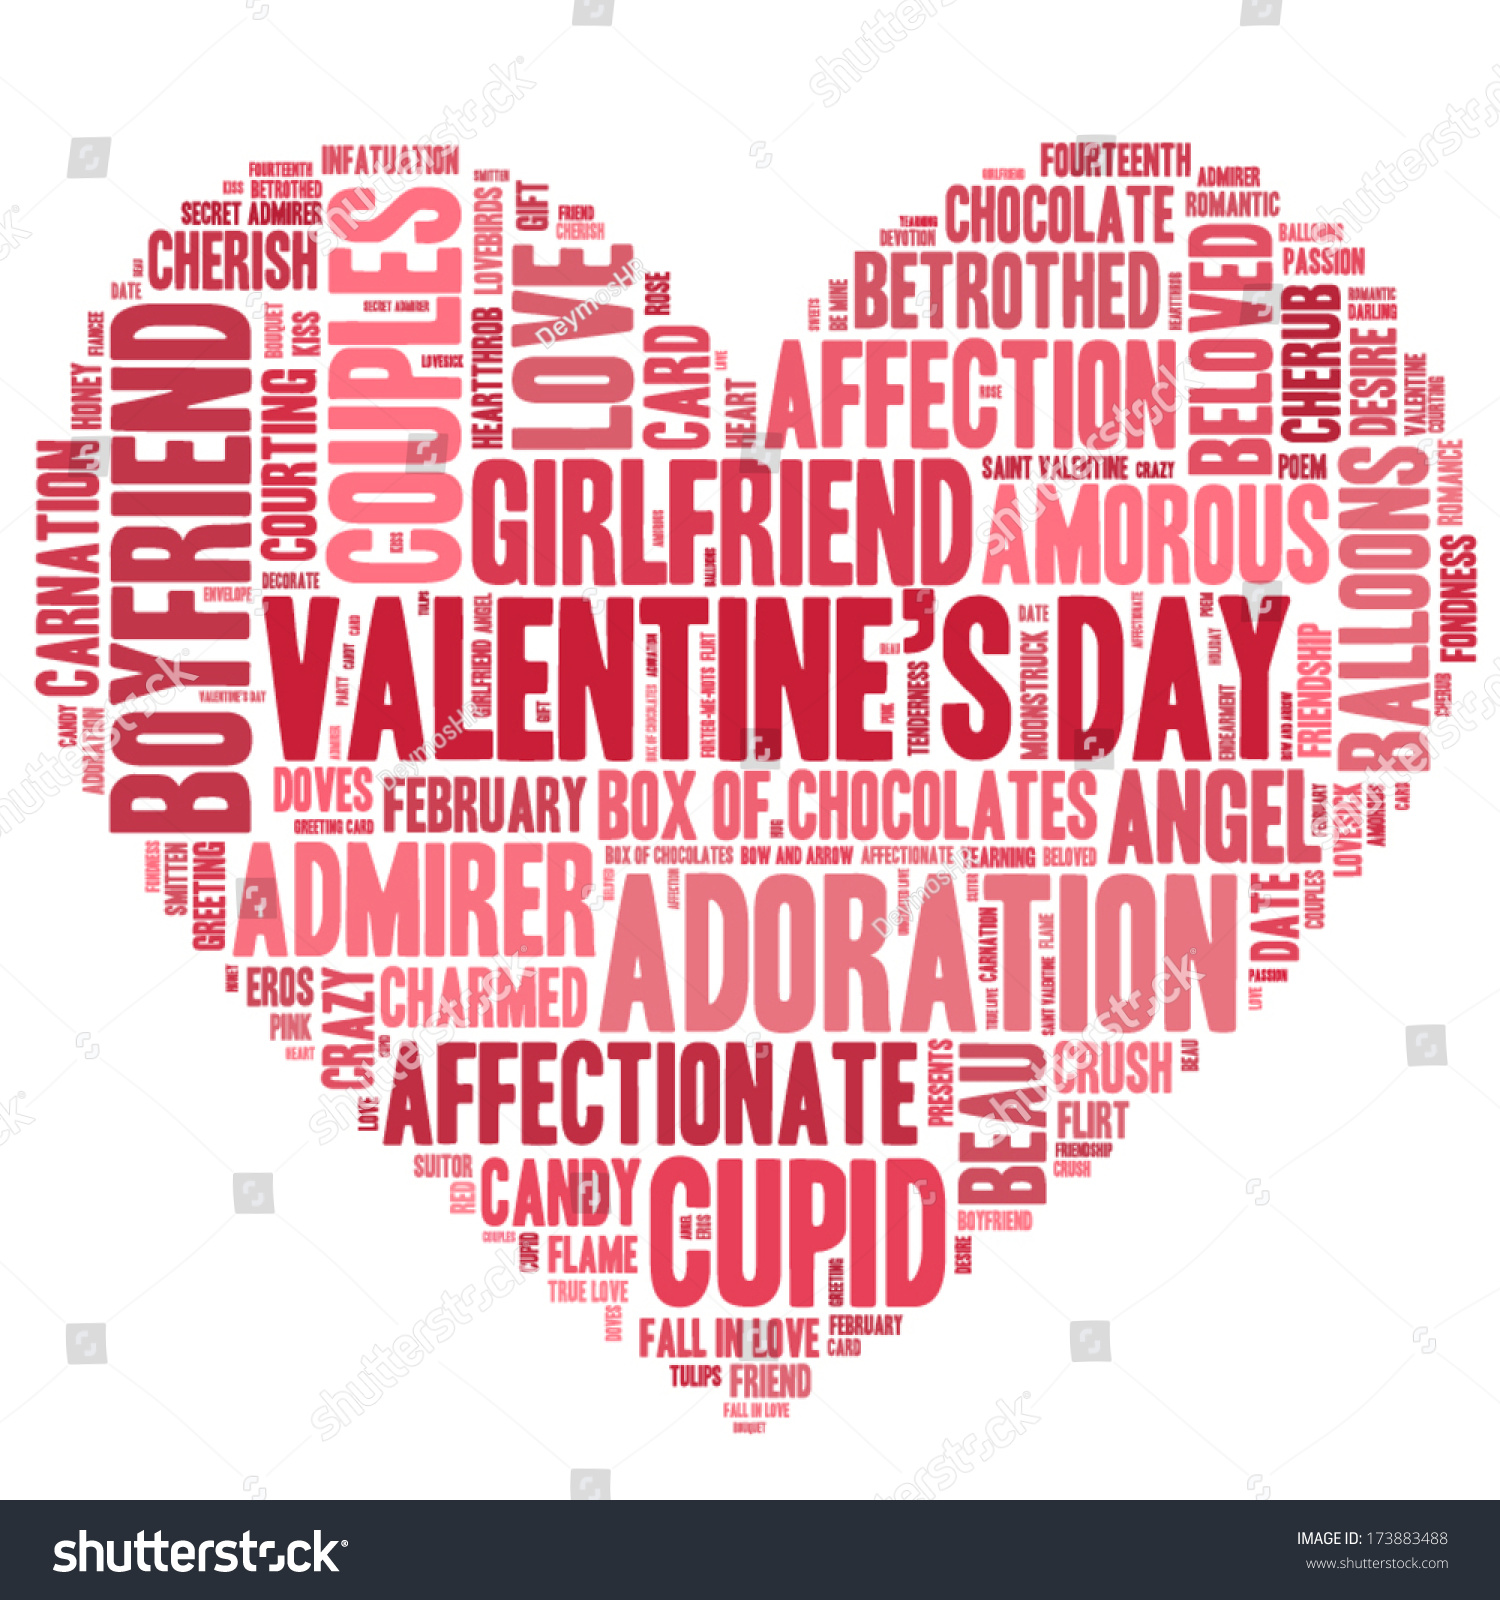 Valentine'S Day Word Cloud Concept Including Terms Such As Love ...